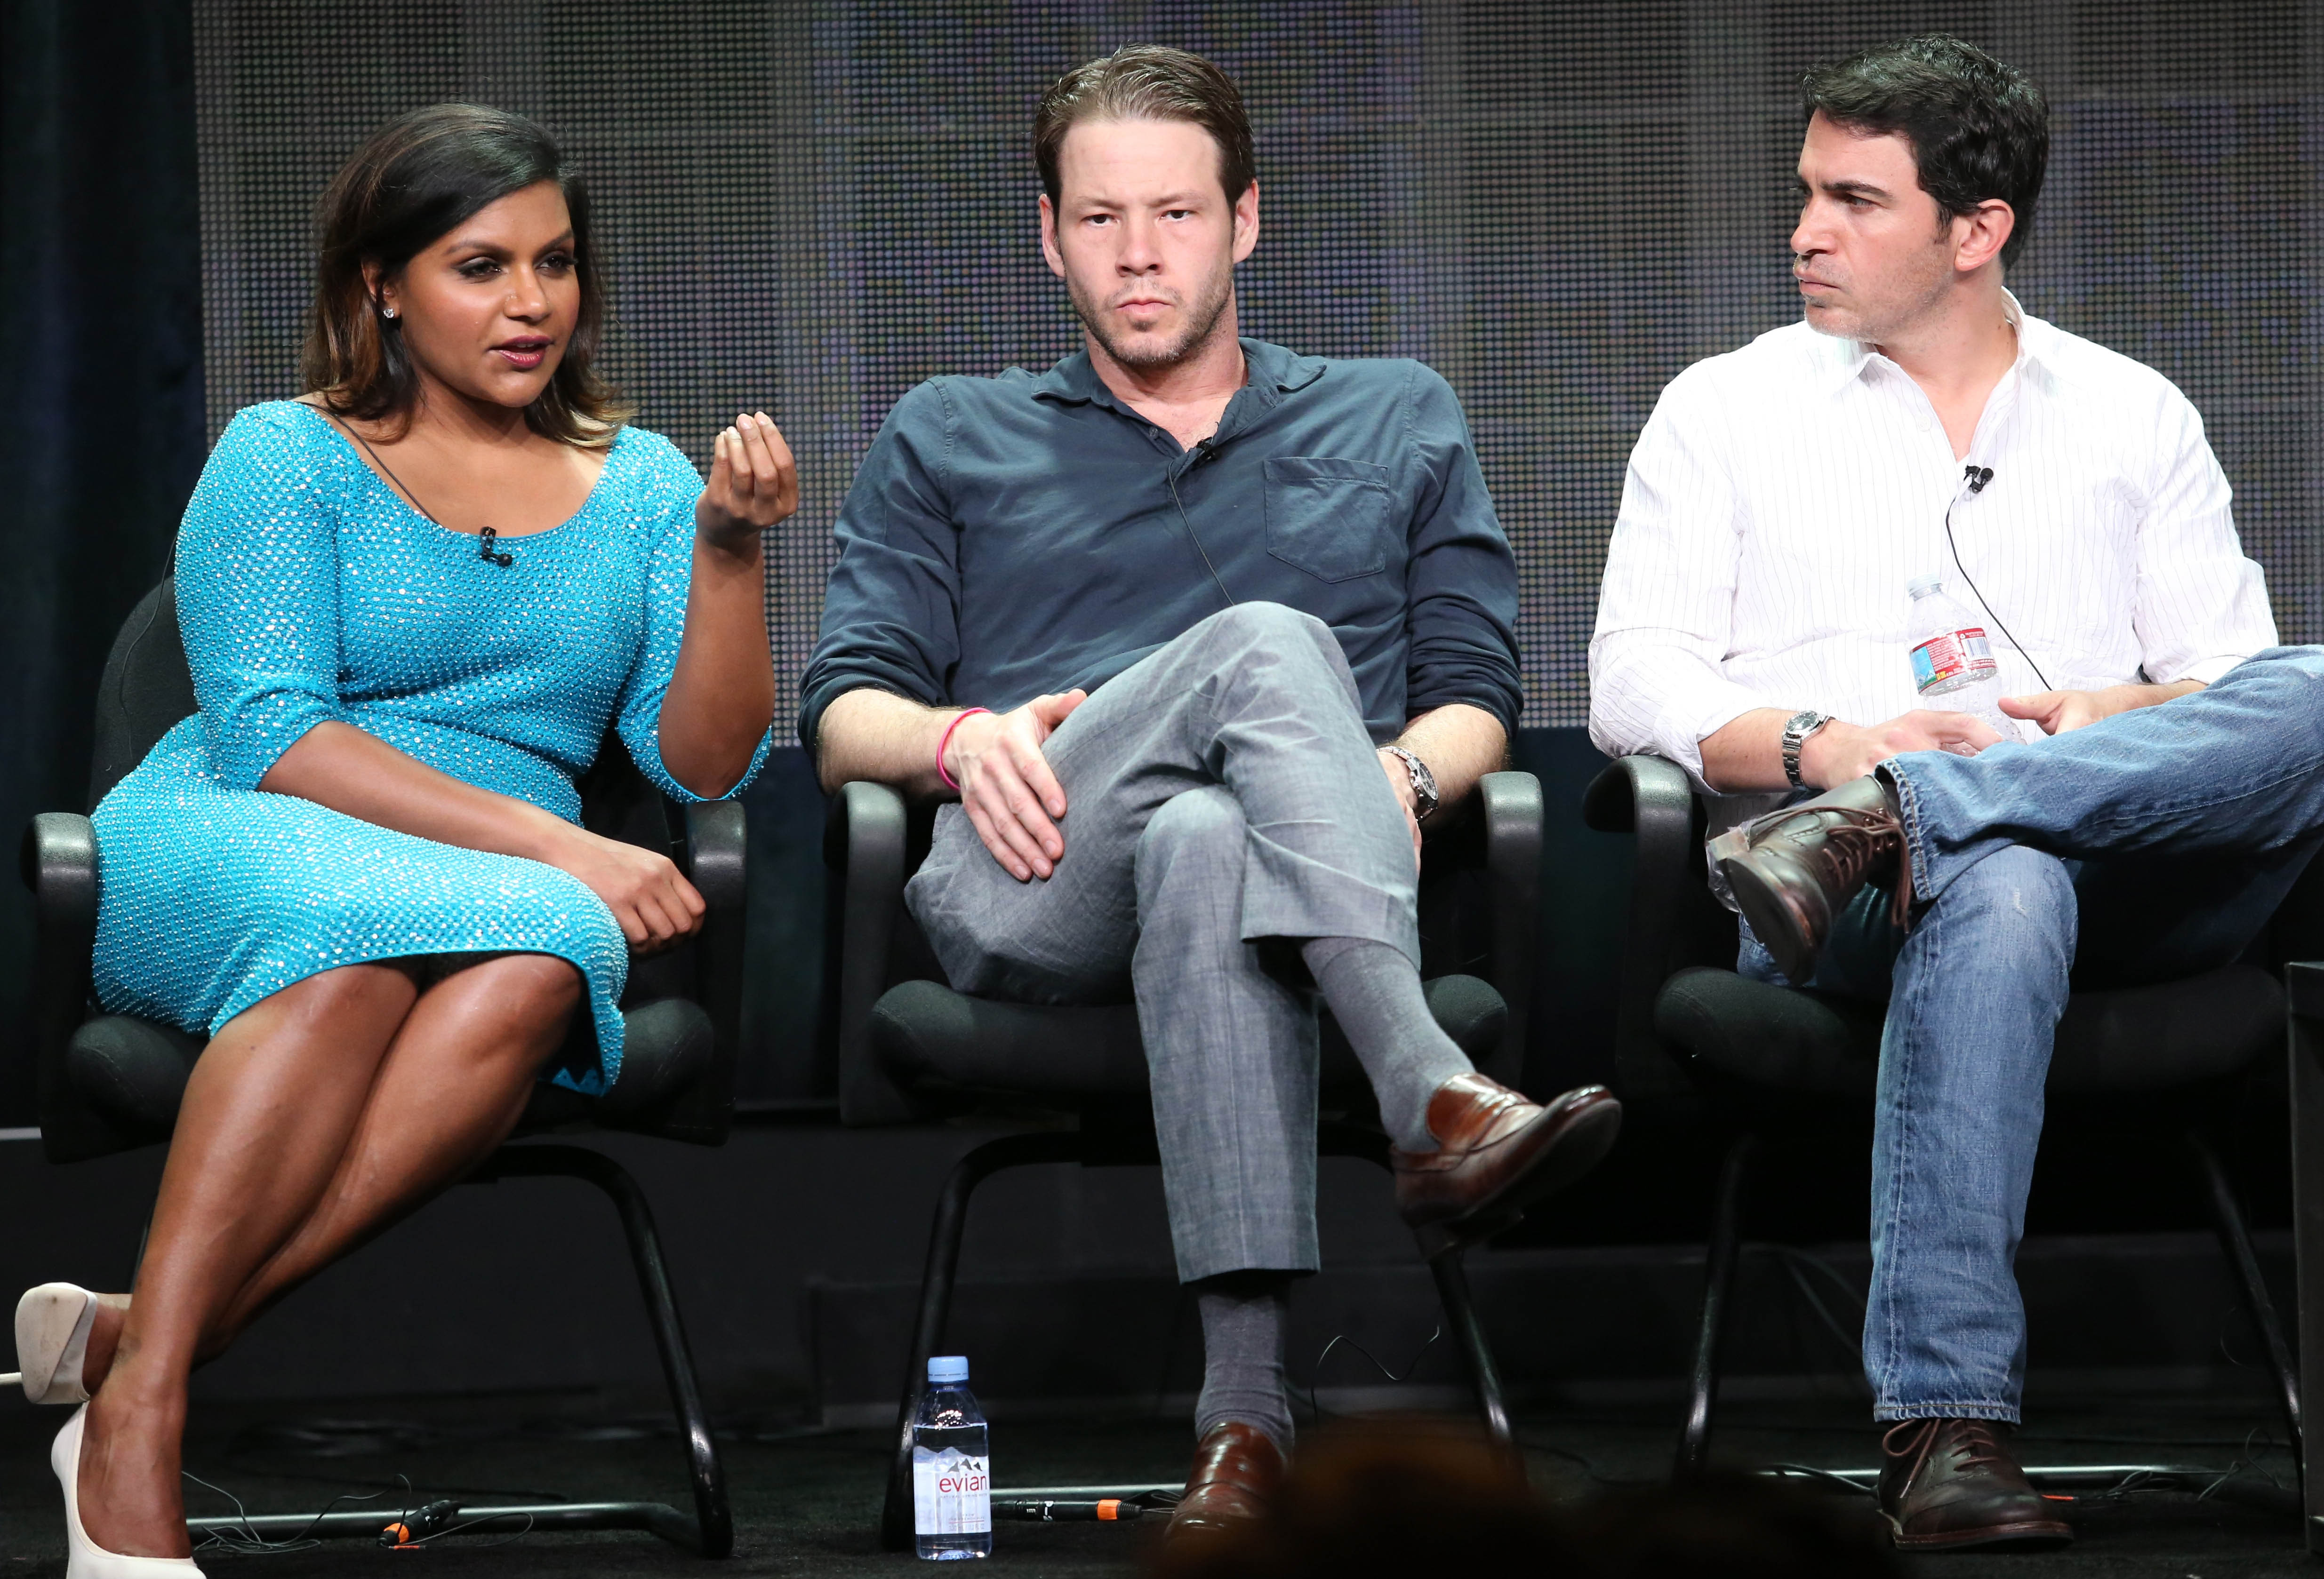 Amazing The Mindy Project Pictures & Backgrounds